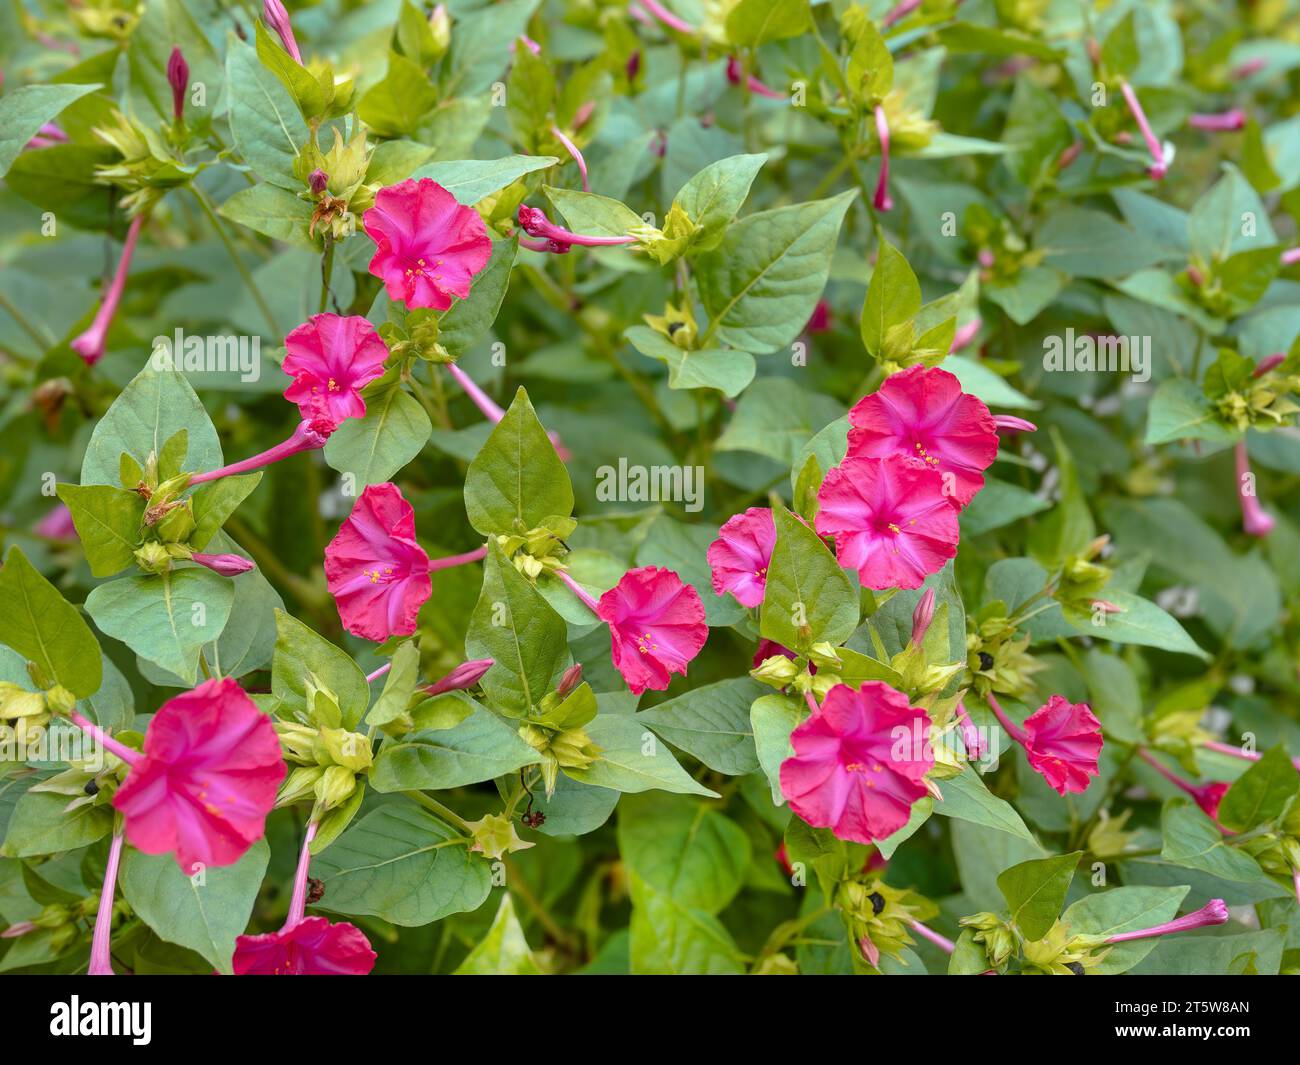 Flowering pink of Four o'clock flower or Marvel of Peru or Mirabilis jalapa (in Latin). Summertime, August, saturated colors, close-up Stock Photo